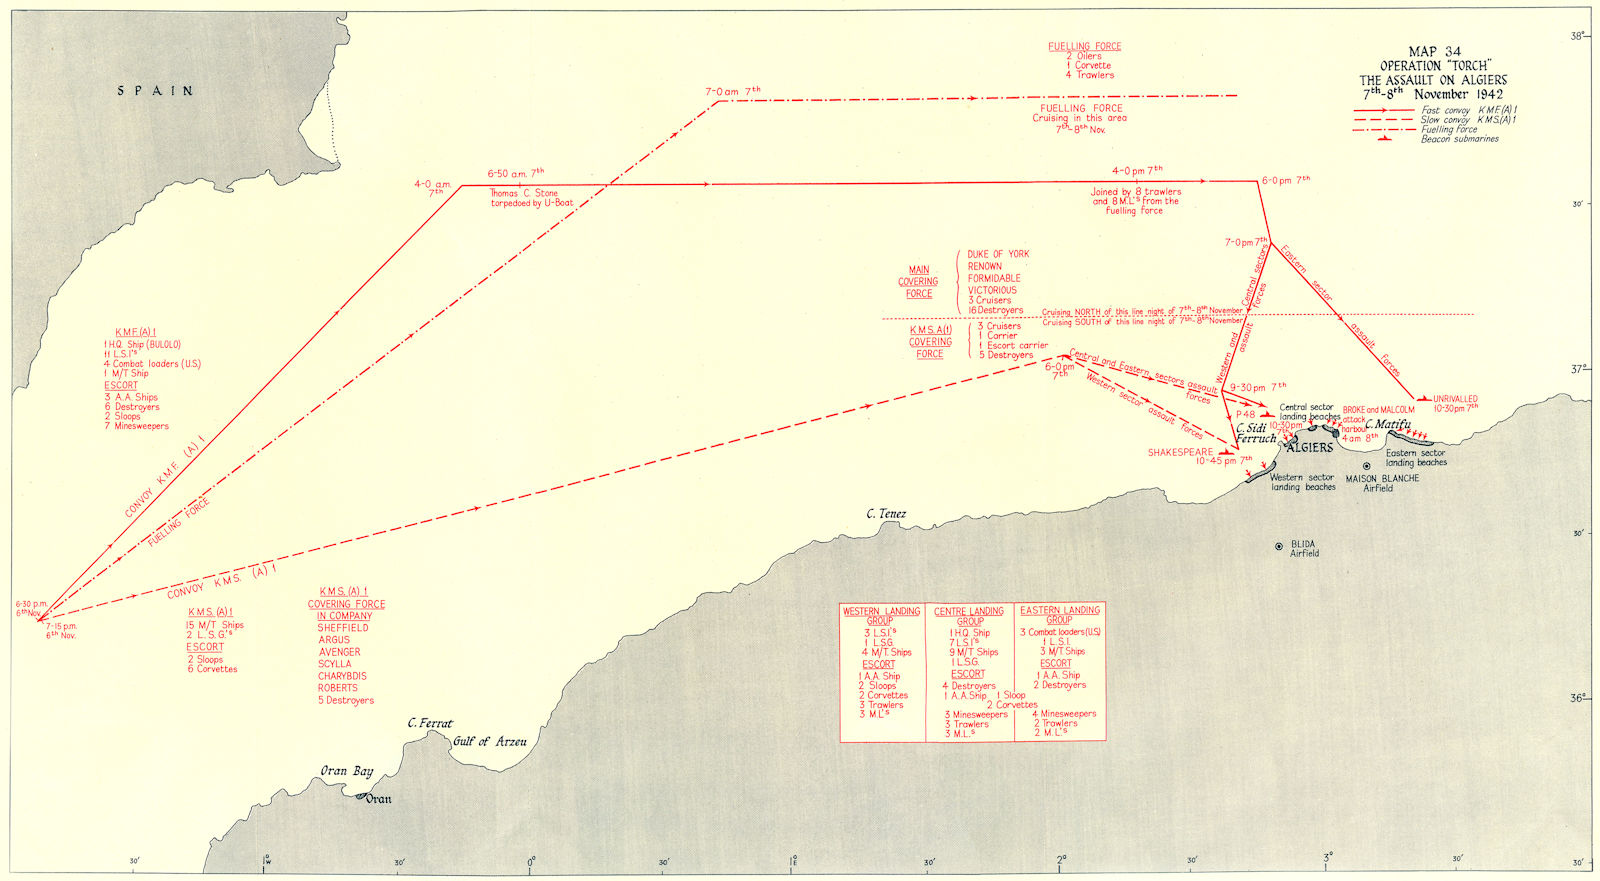 ALGERIA. Operation Torch assault, Algiers 7th-8th Nov 1942 1956 old map